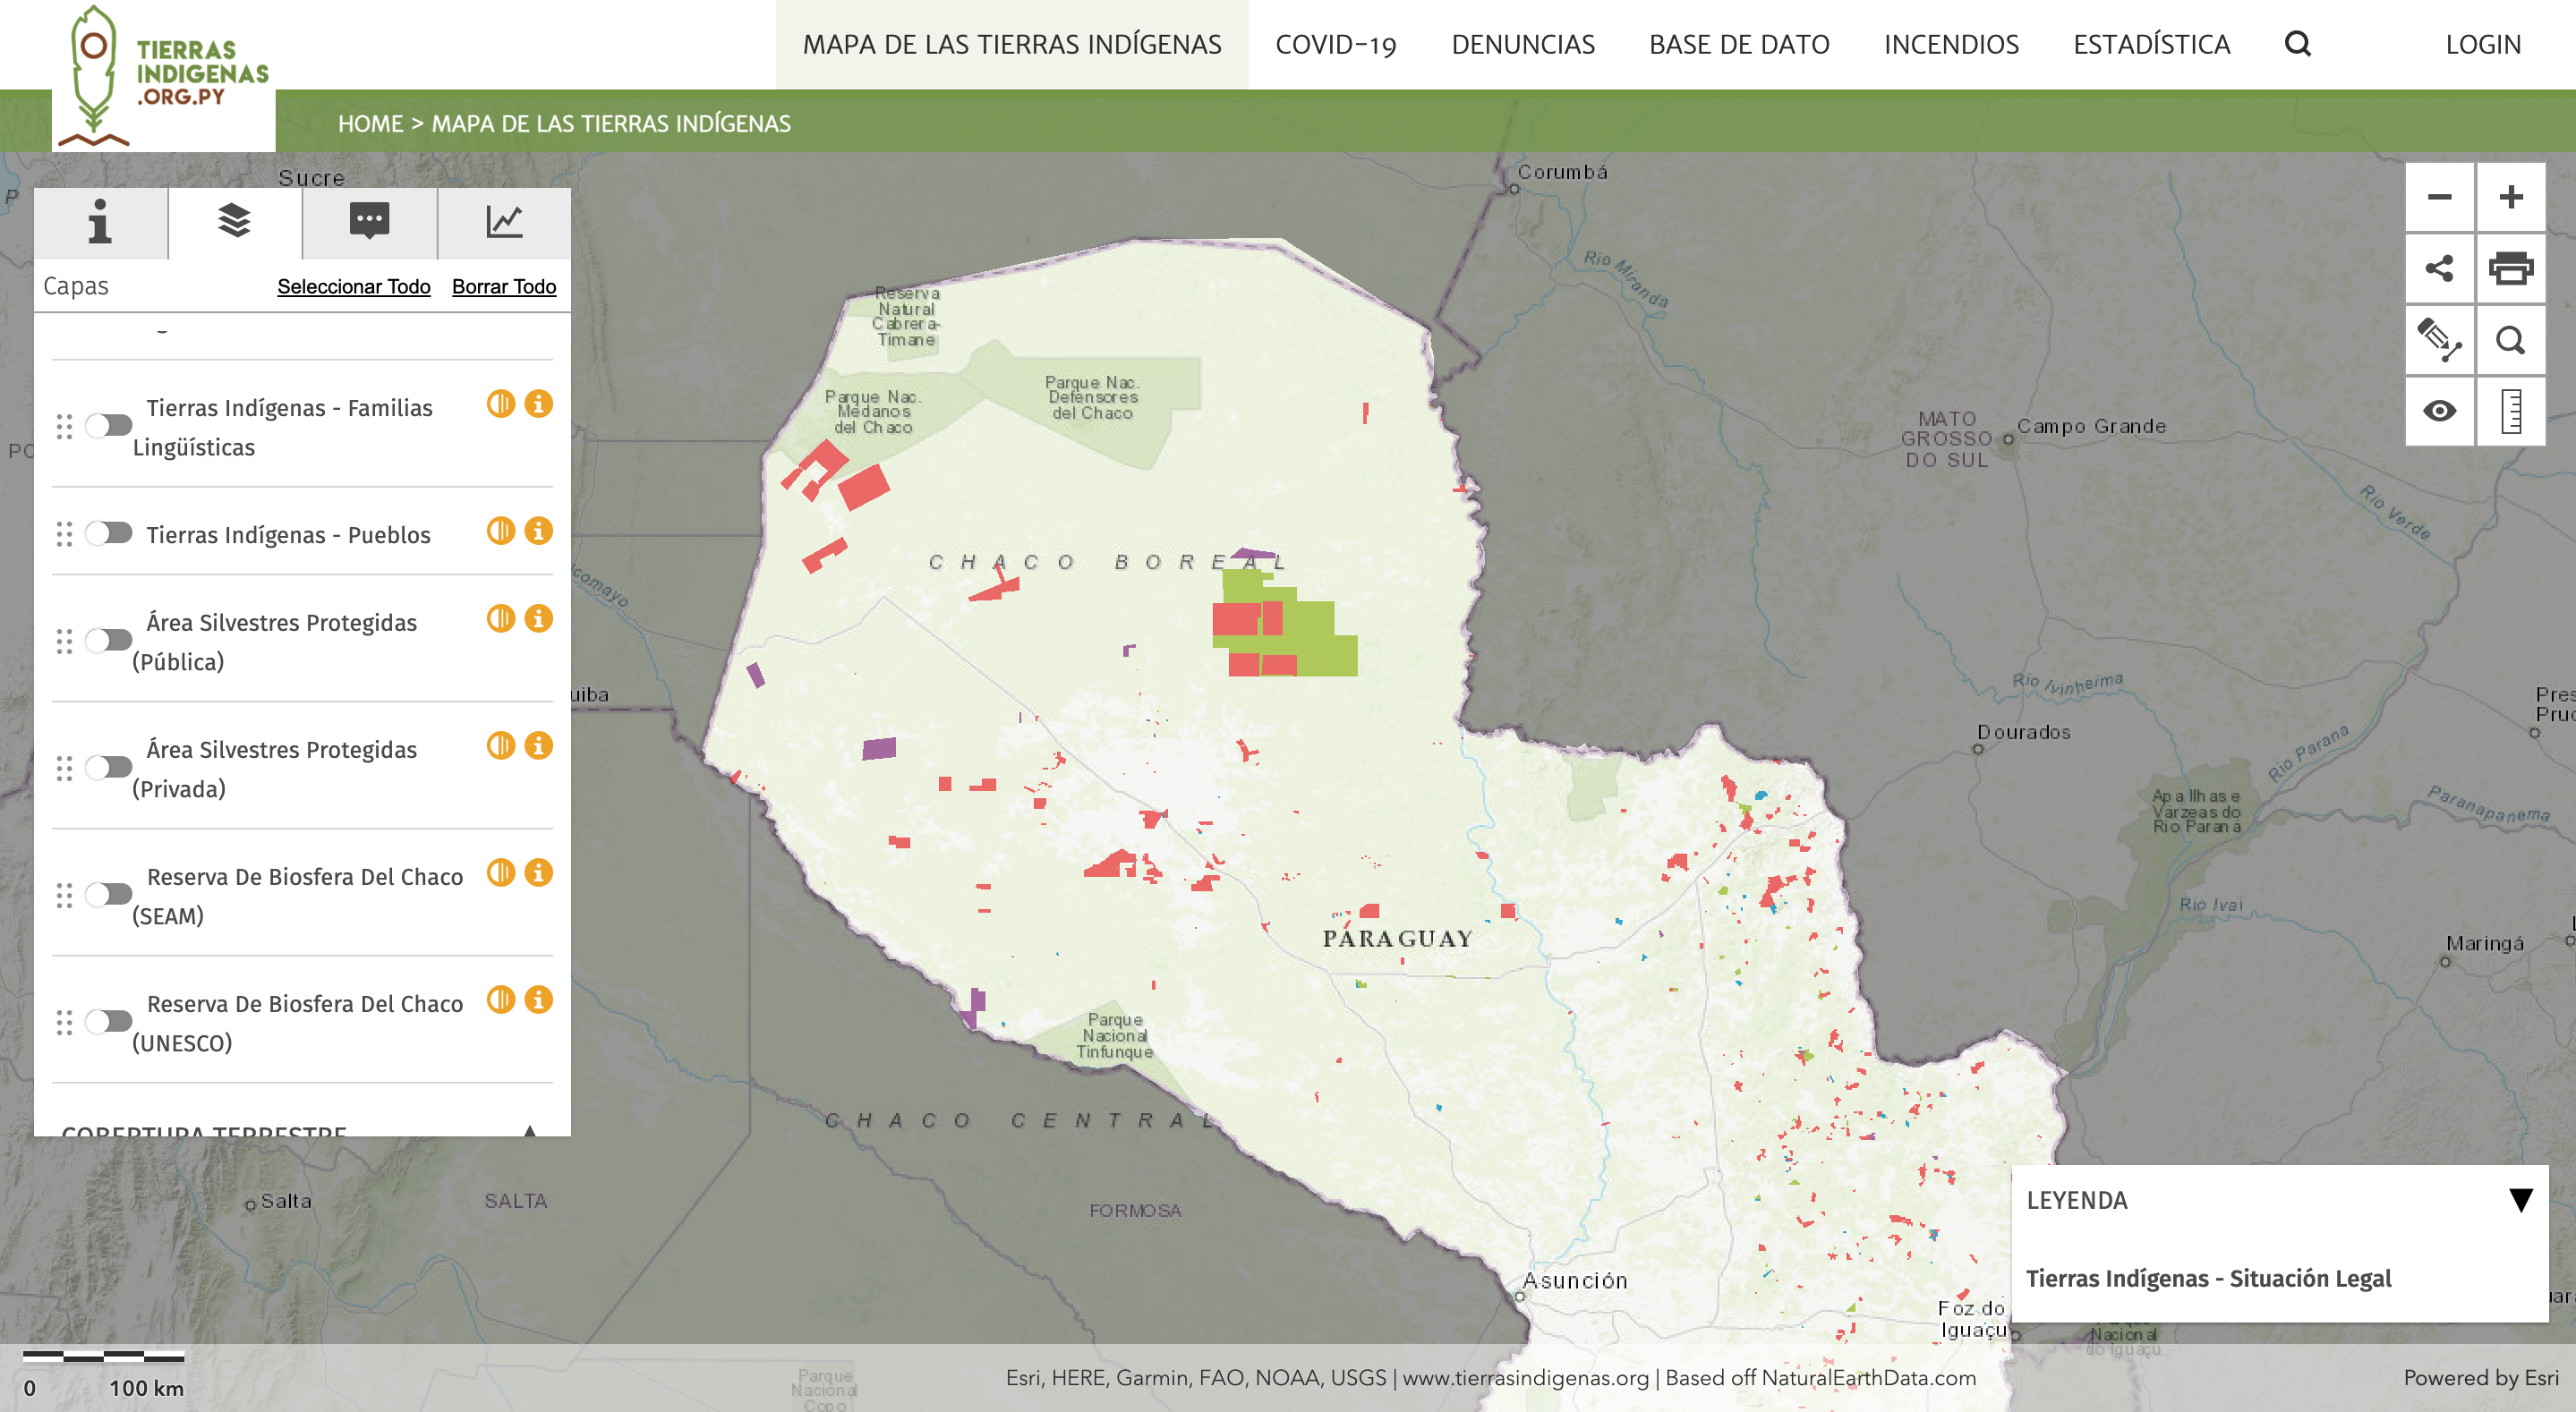 The Tierras Indigenas project uses MapBuilder to display a compilation of indigenous territories in Paraguay. This project is coordinated by the Federation for the Self-Determination of Indigenous Peoples (FAPI). Click the image to learn more.